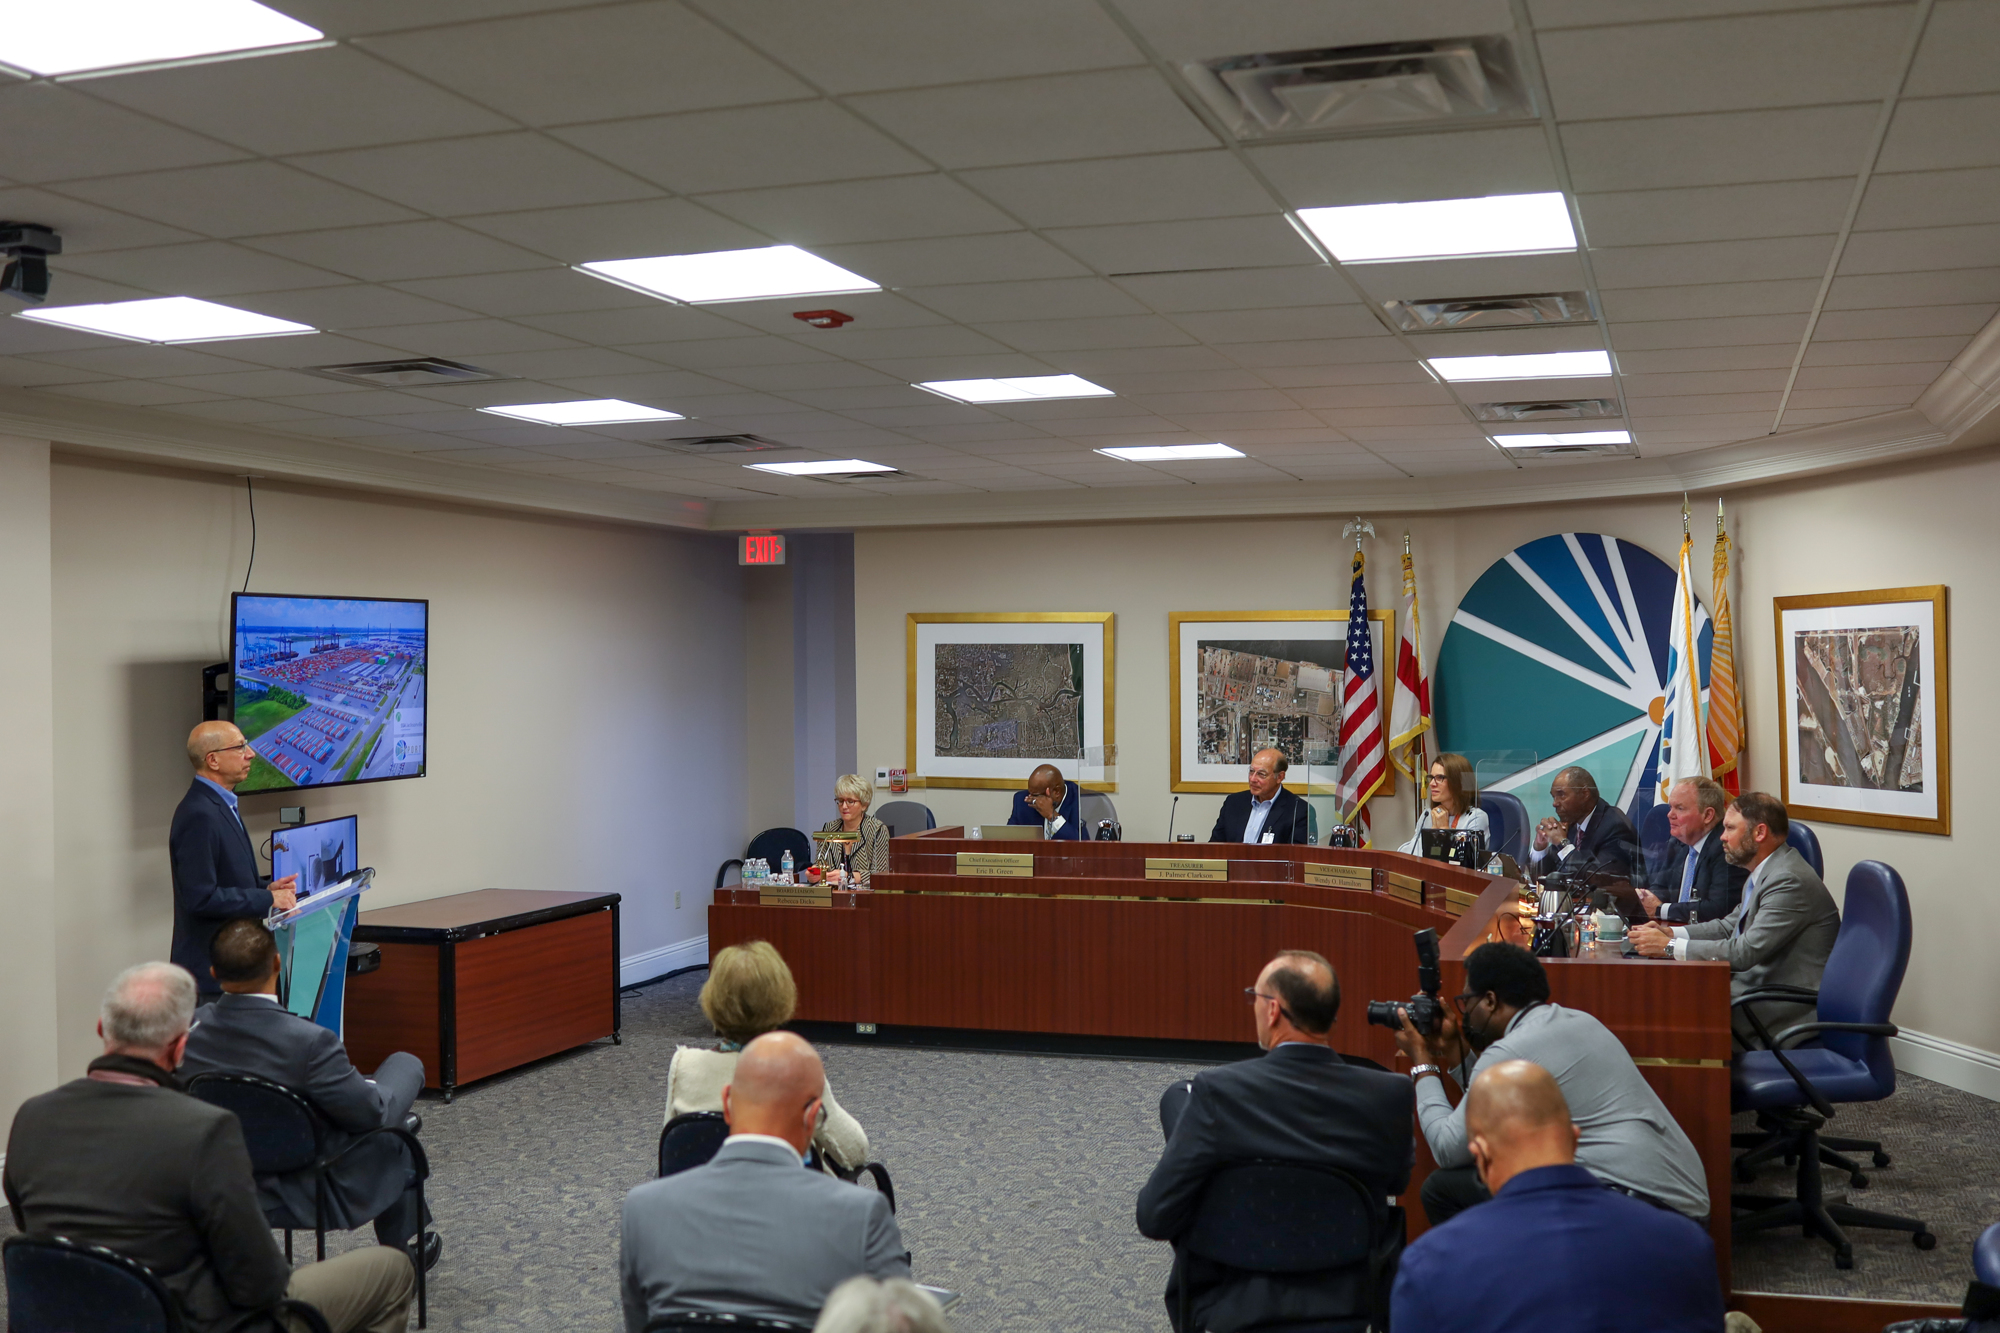 Ari Steinberg, SSA Vice President of Project Engineering and Implementation, speaks at the JaxPort board of directors meeting Sep. 27. (JaxPort photo)